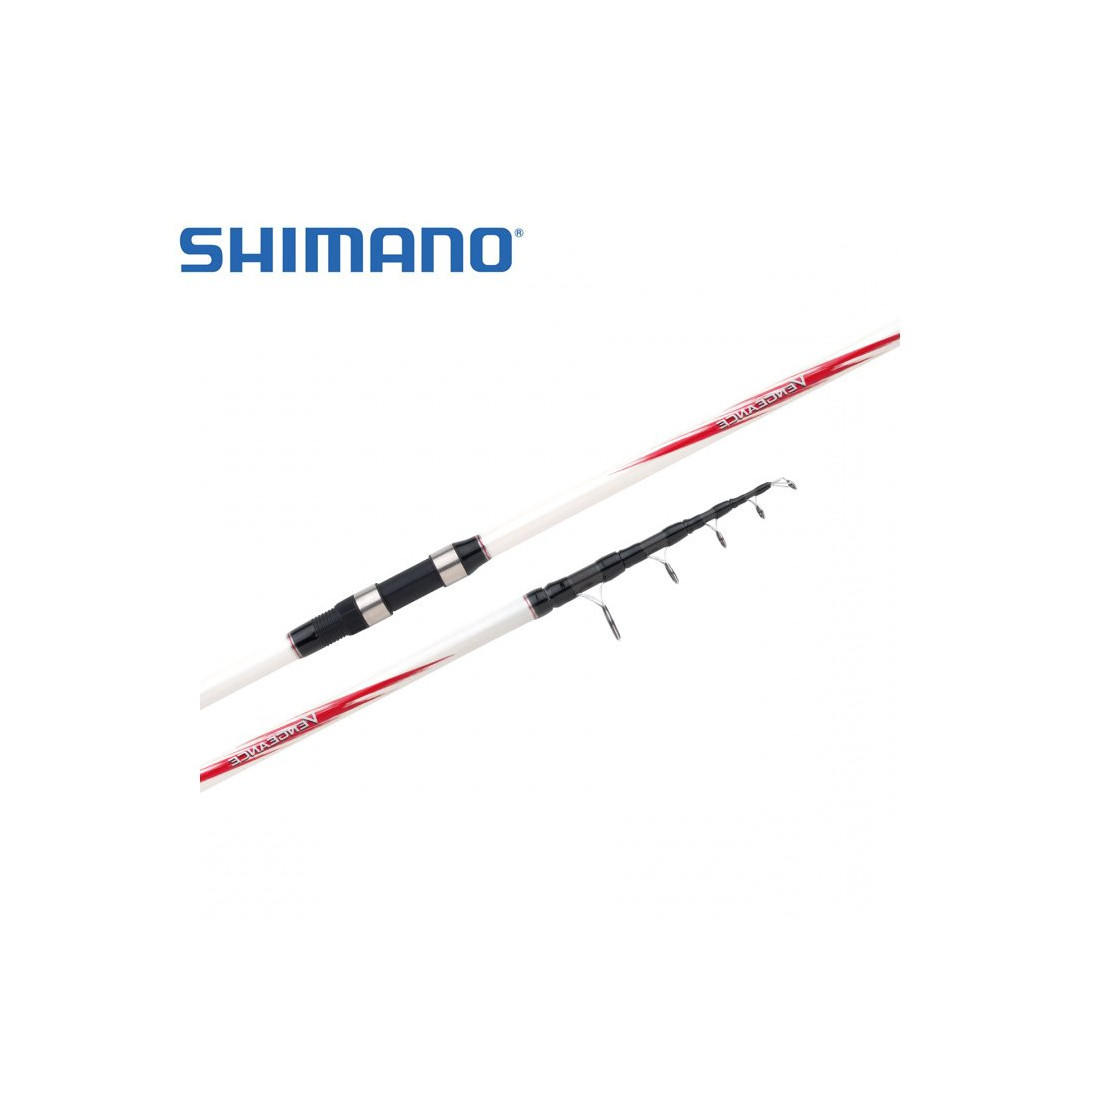 Shimano Surf Te Vengeance Cx 430-170 One Colour One Size 